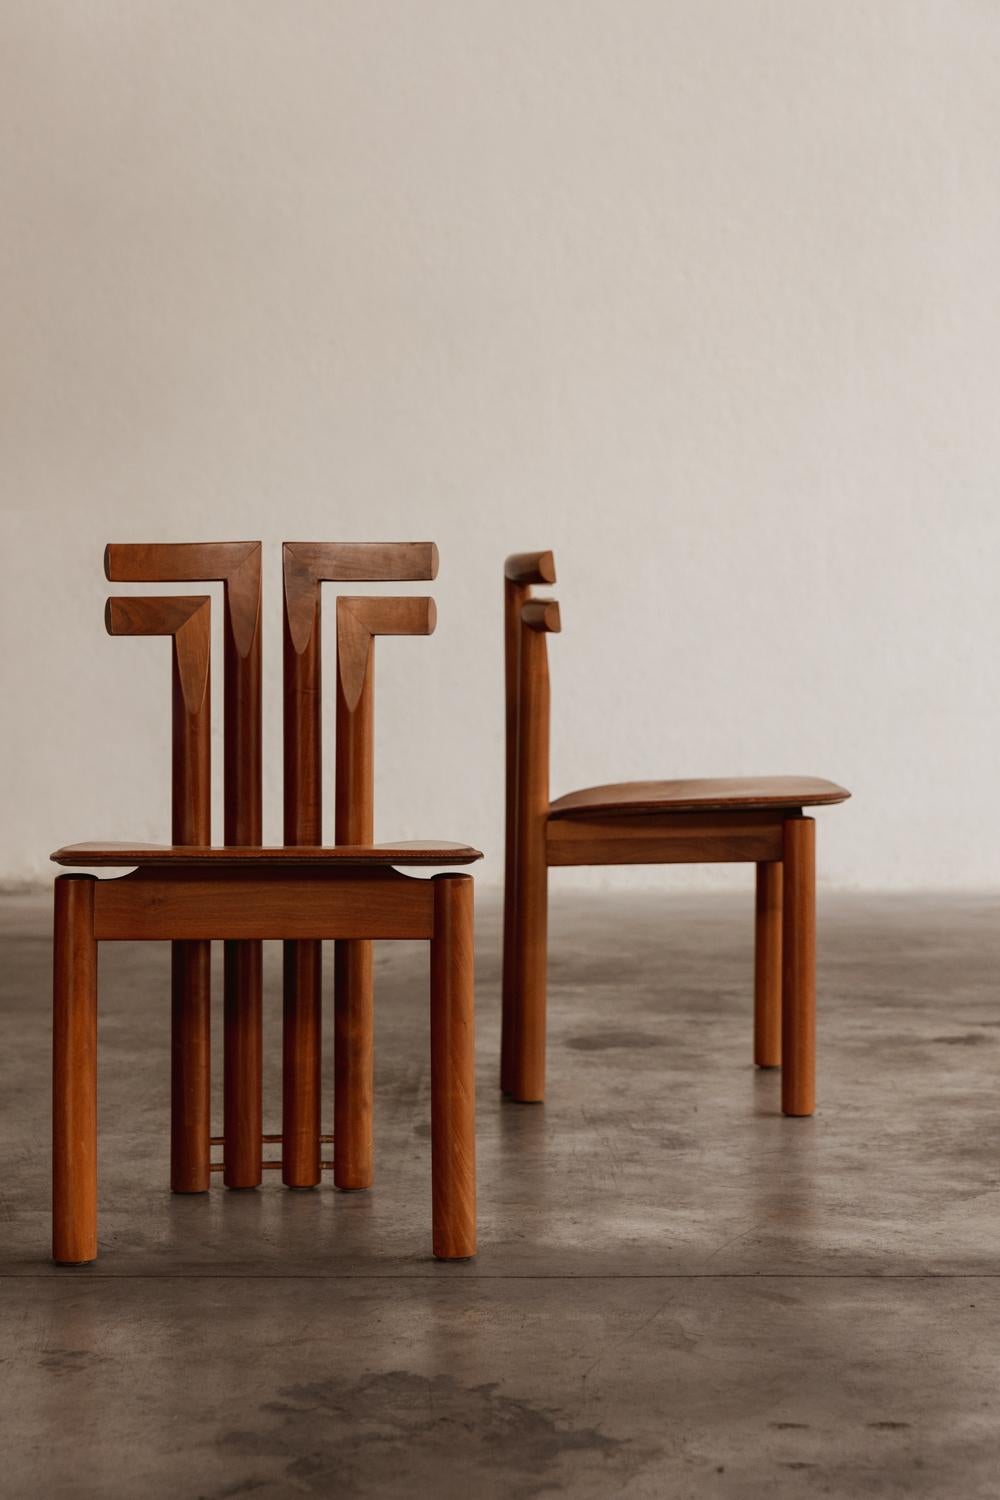 Italian Mario Marenco “Sapporo” Dining Chairs for Mobil Girgi, 1970, set of 2 For Sale